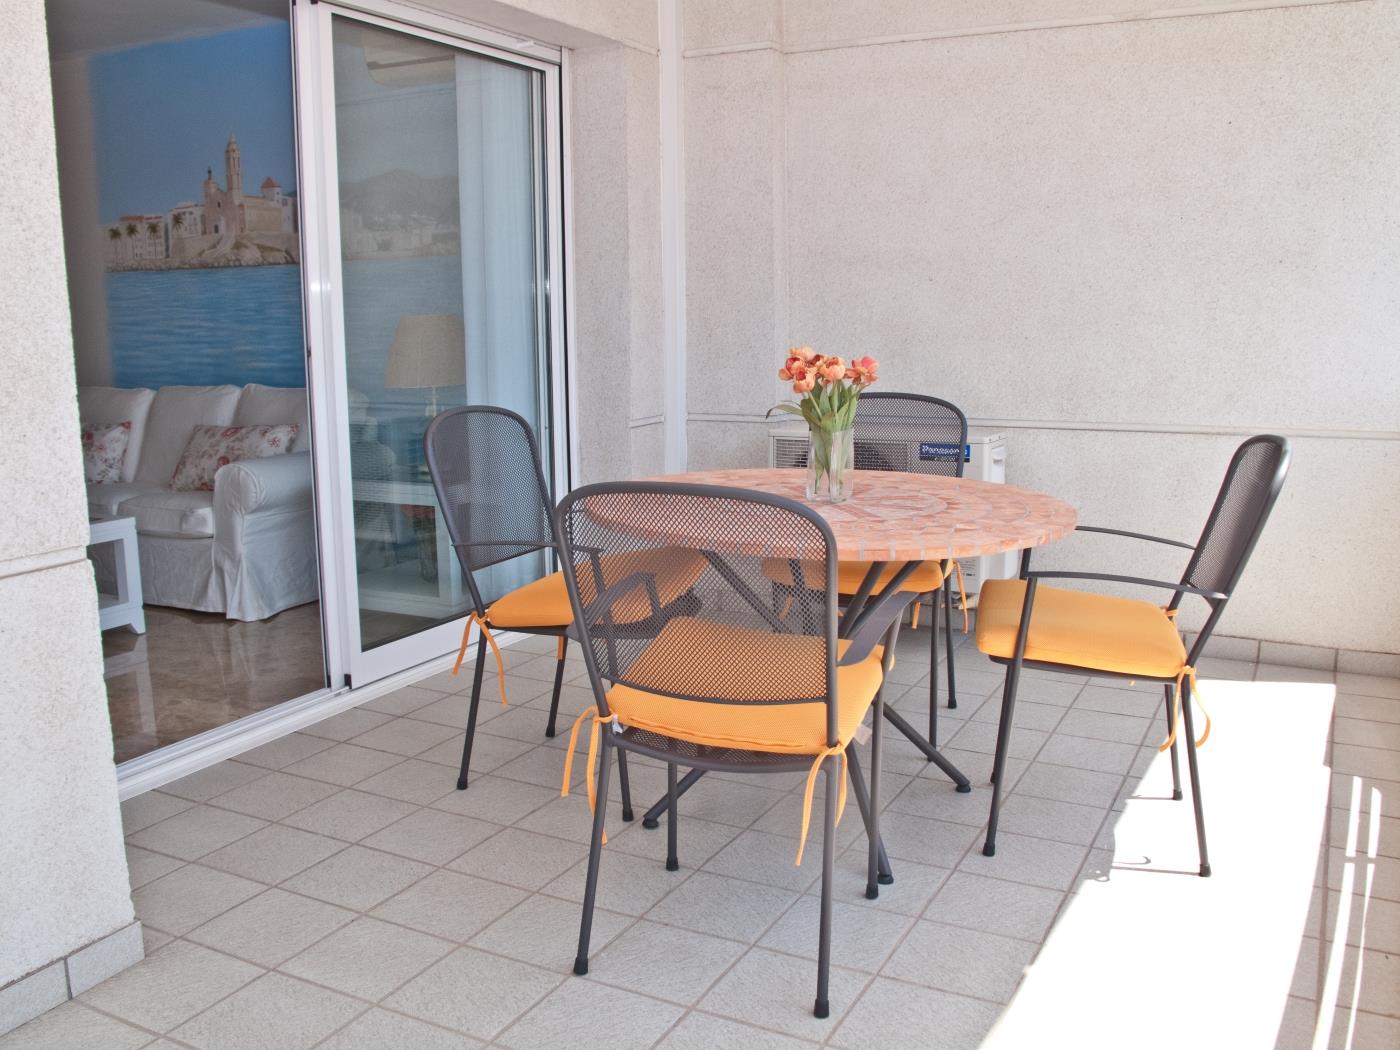 DELICIOUS BY BLAUSITGES Elegant apartment with pool in Sitges. in SITGES